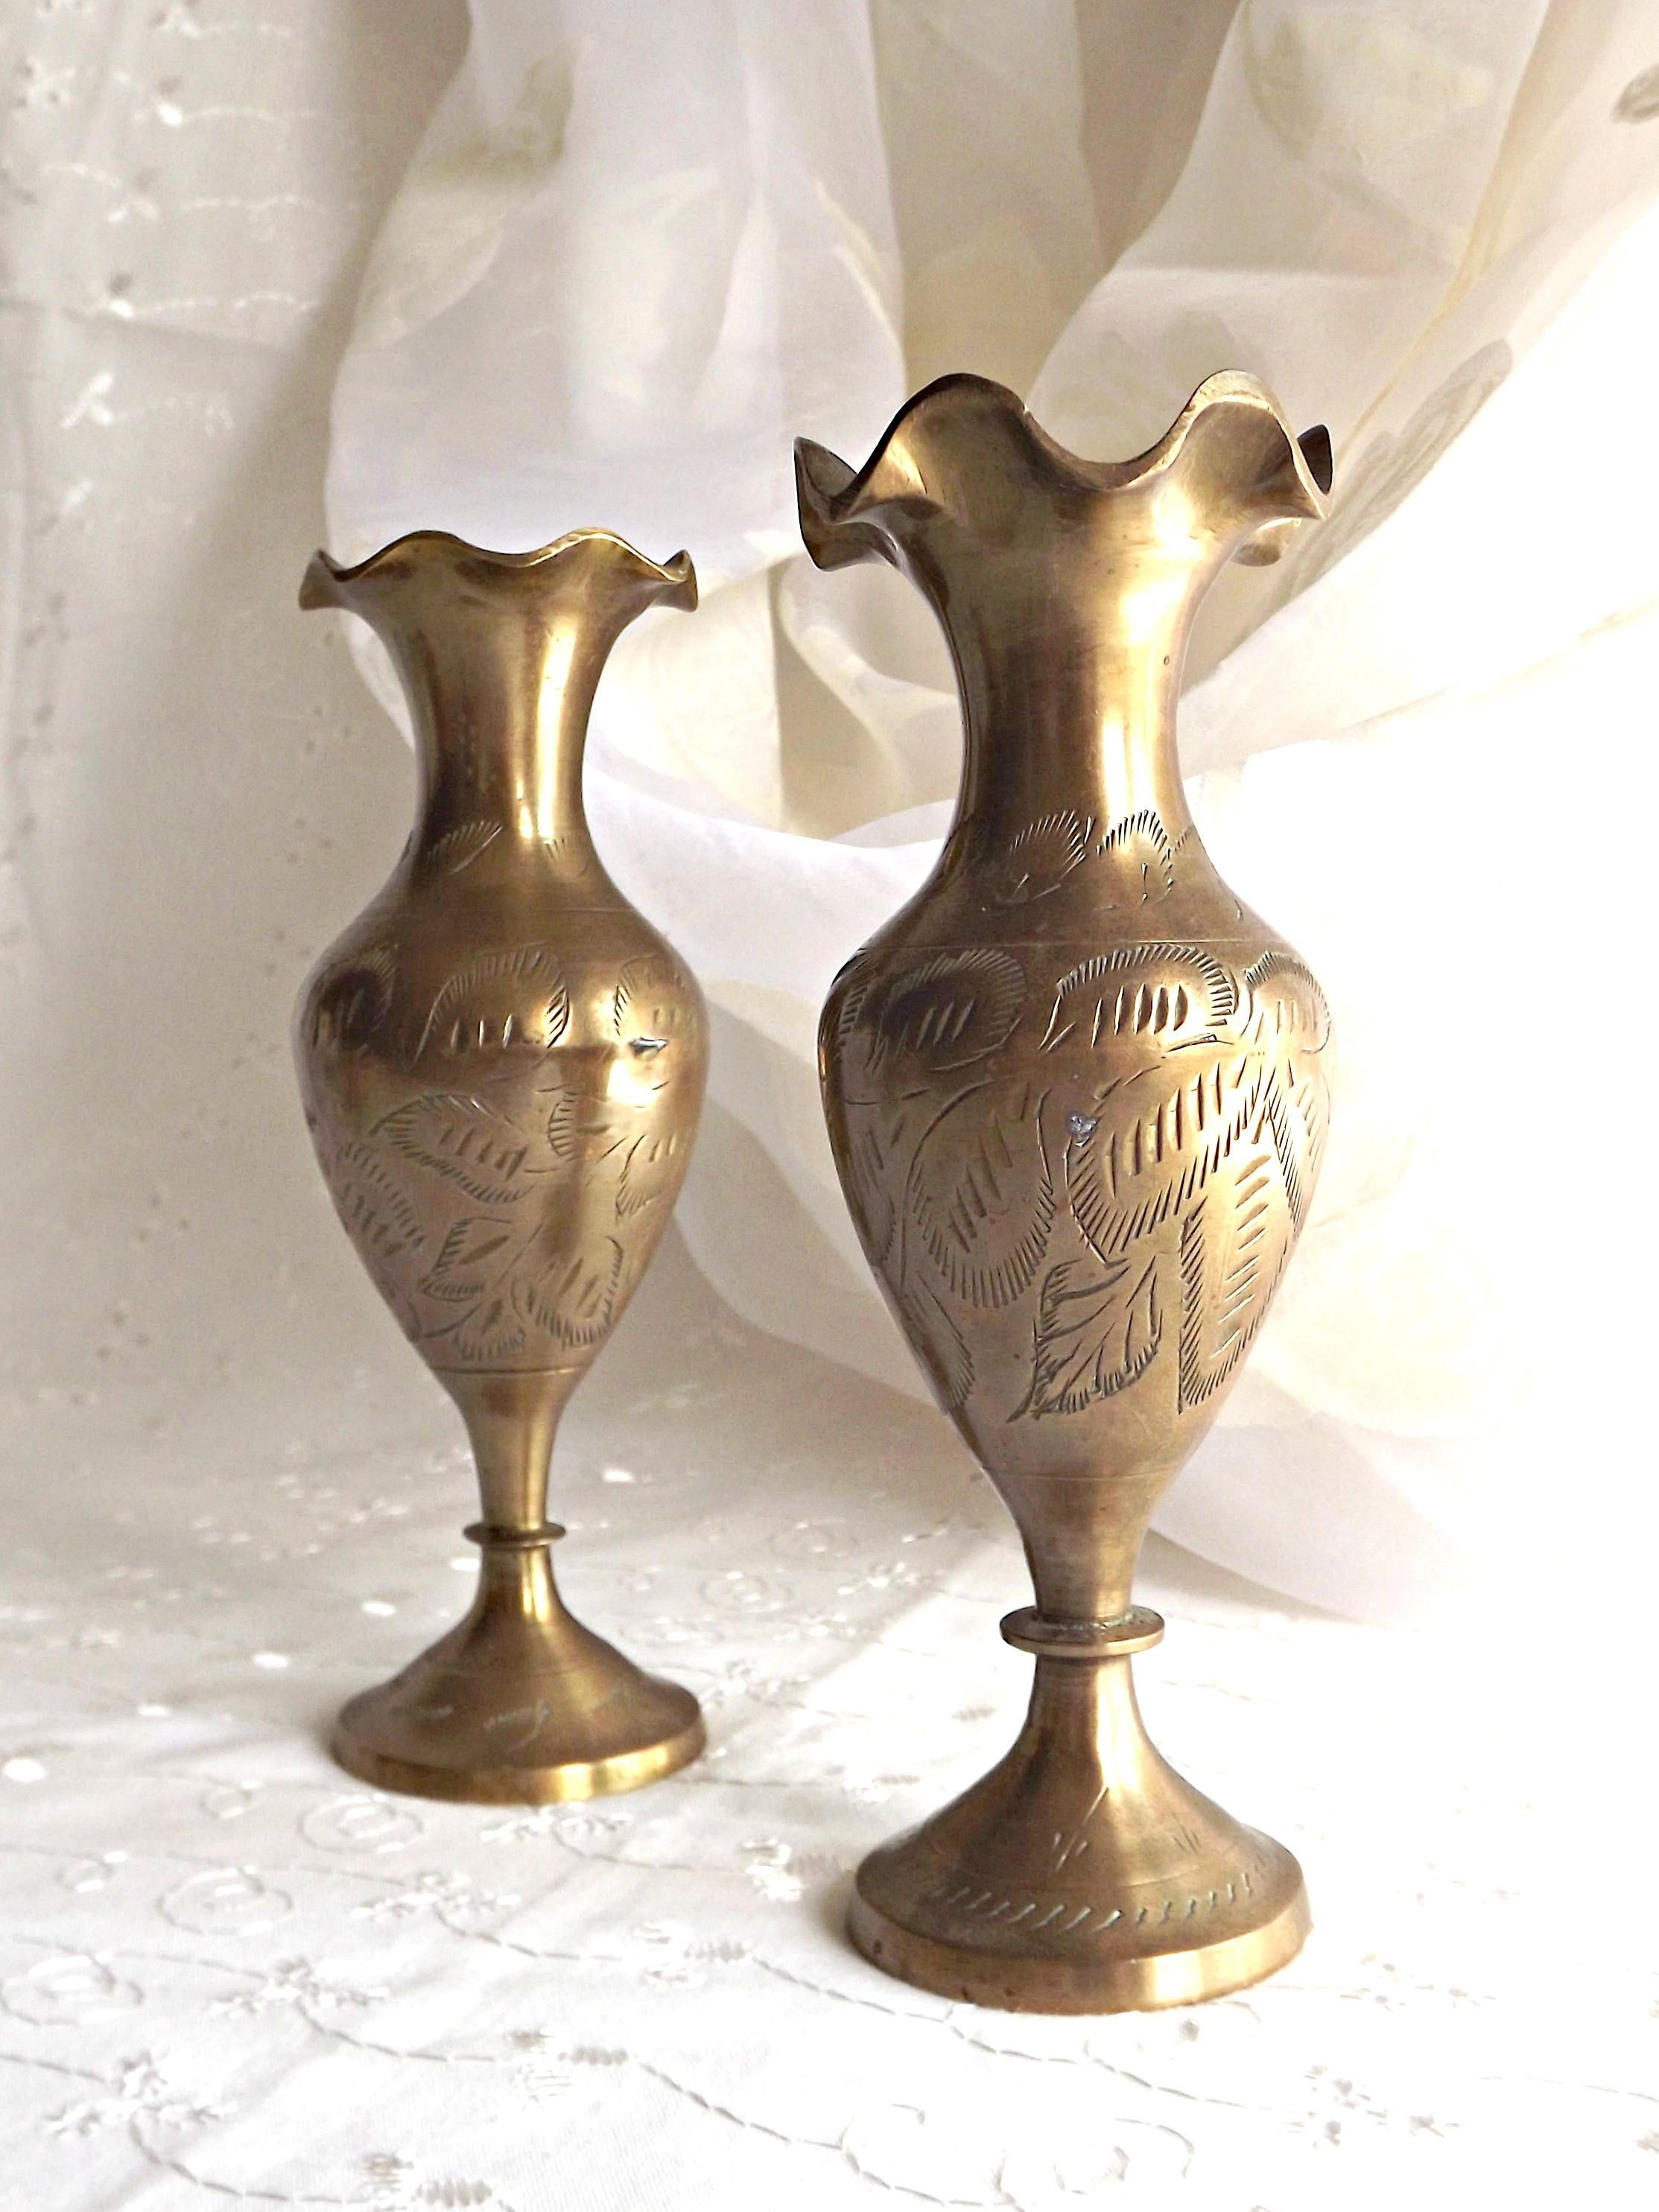 30 Famous Antique Brass Vases From India 2024 free download antique brass vases from india of brass bud vase stock brass vase etched brass vase retro chic brass regarding brass bud vase stock brass vase etched brass vase retro chic brass bohemian